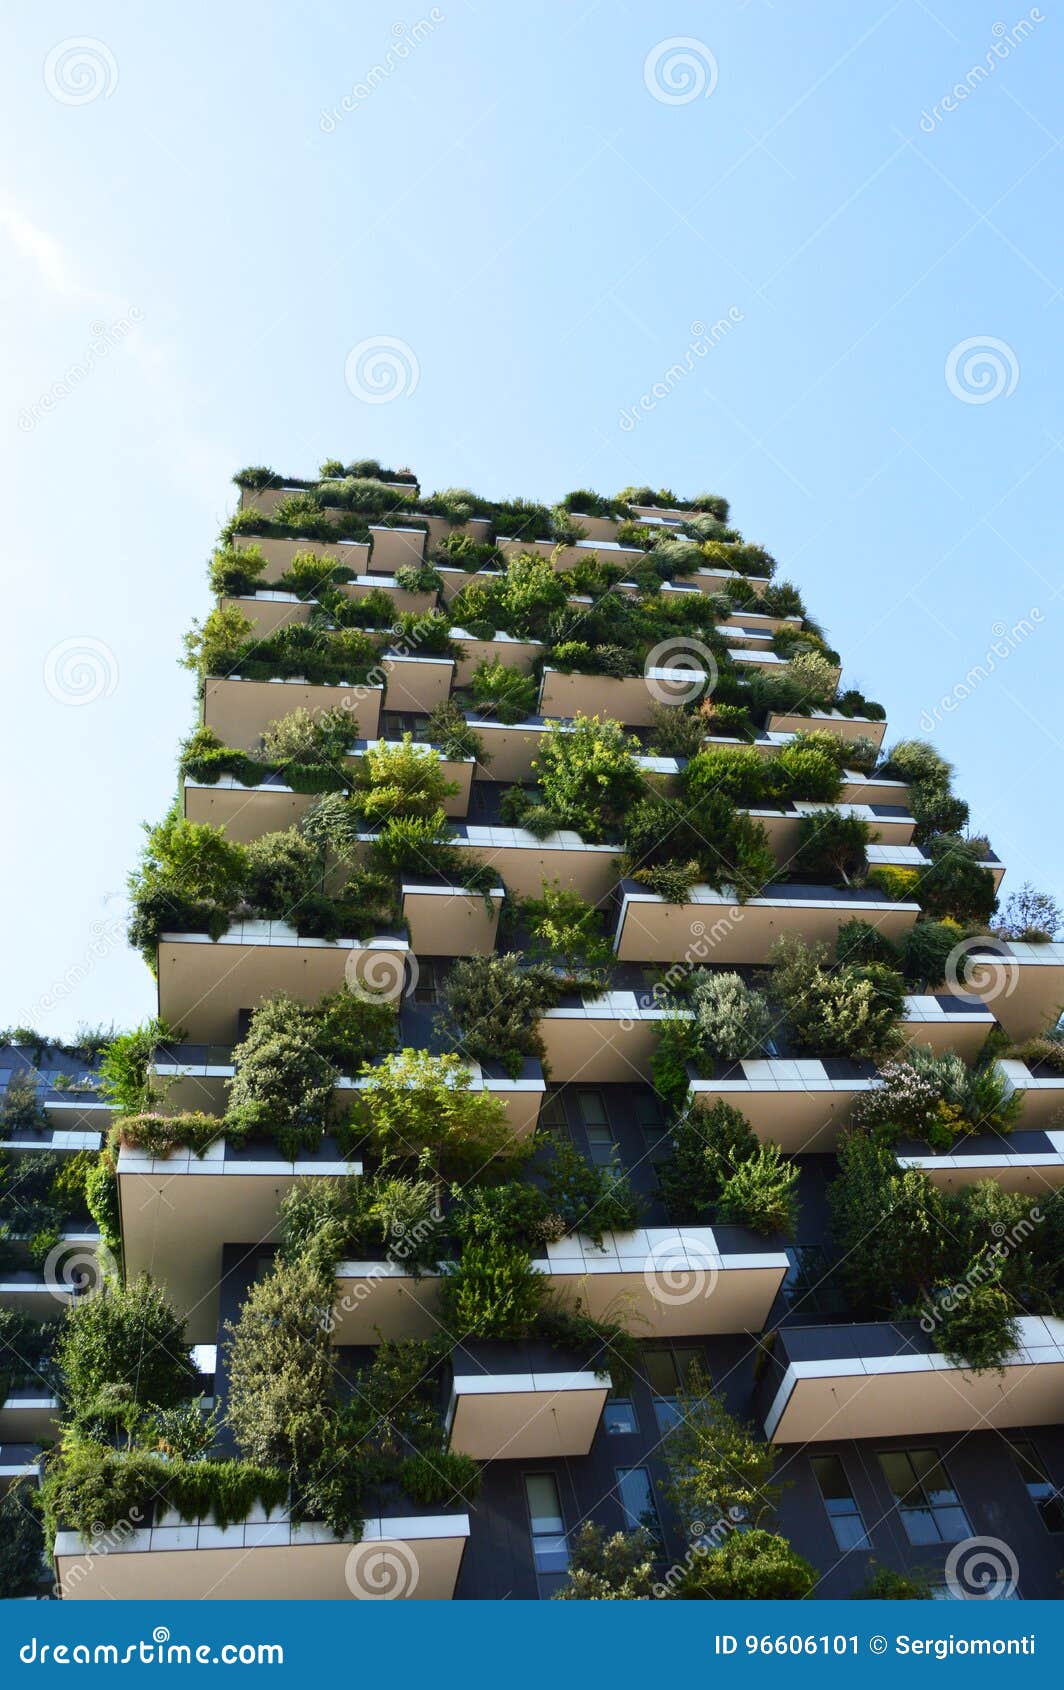 modern and ecologic skyscrapers with many trees on every balcony. bosco verticale, milan, italy